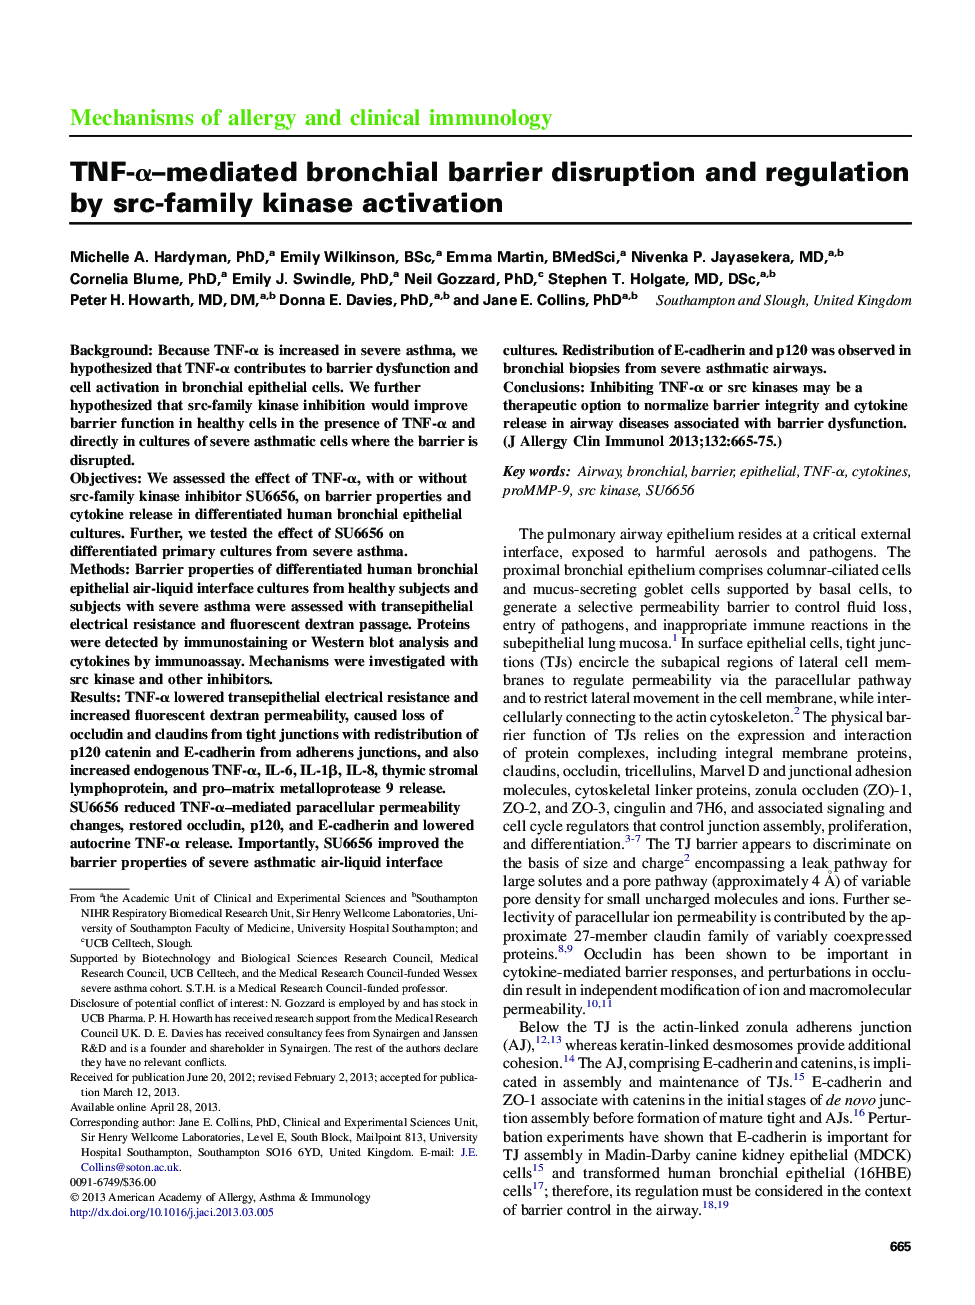 TNF-Î±-mediated bronchial barrier disruption and regulation by src-family kinase activation